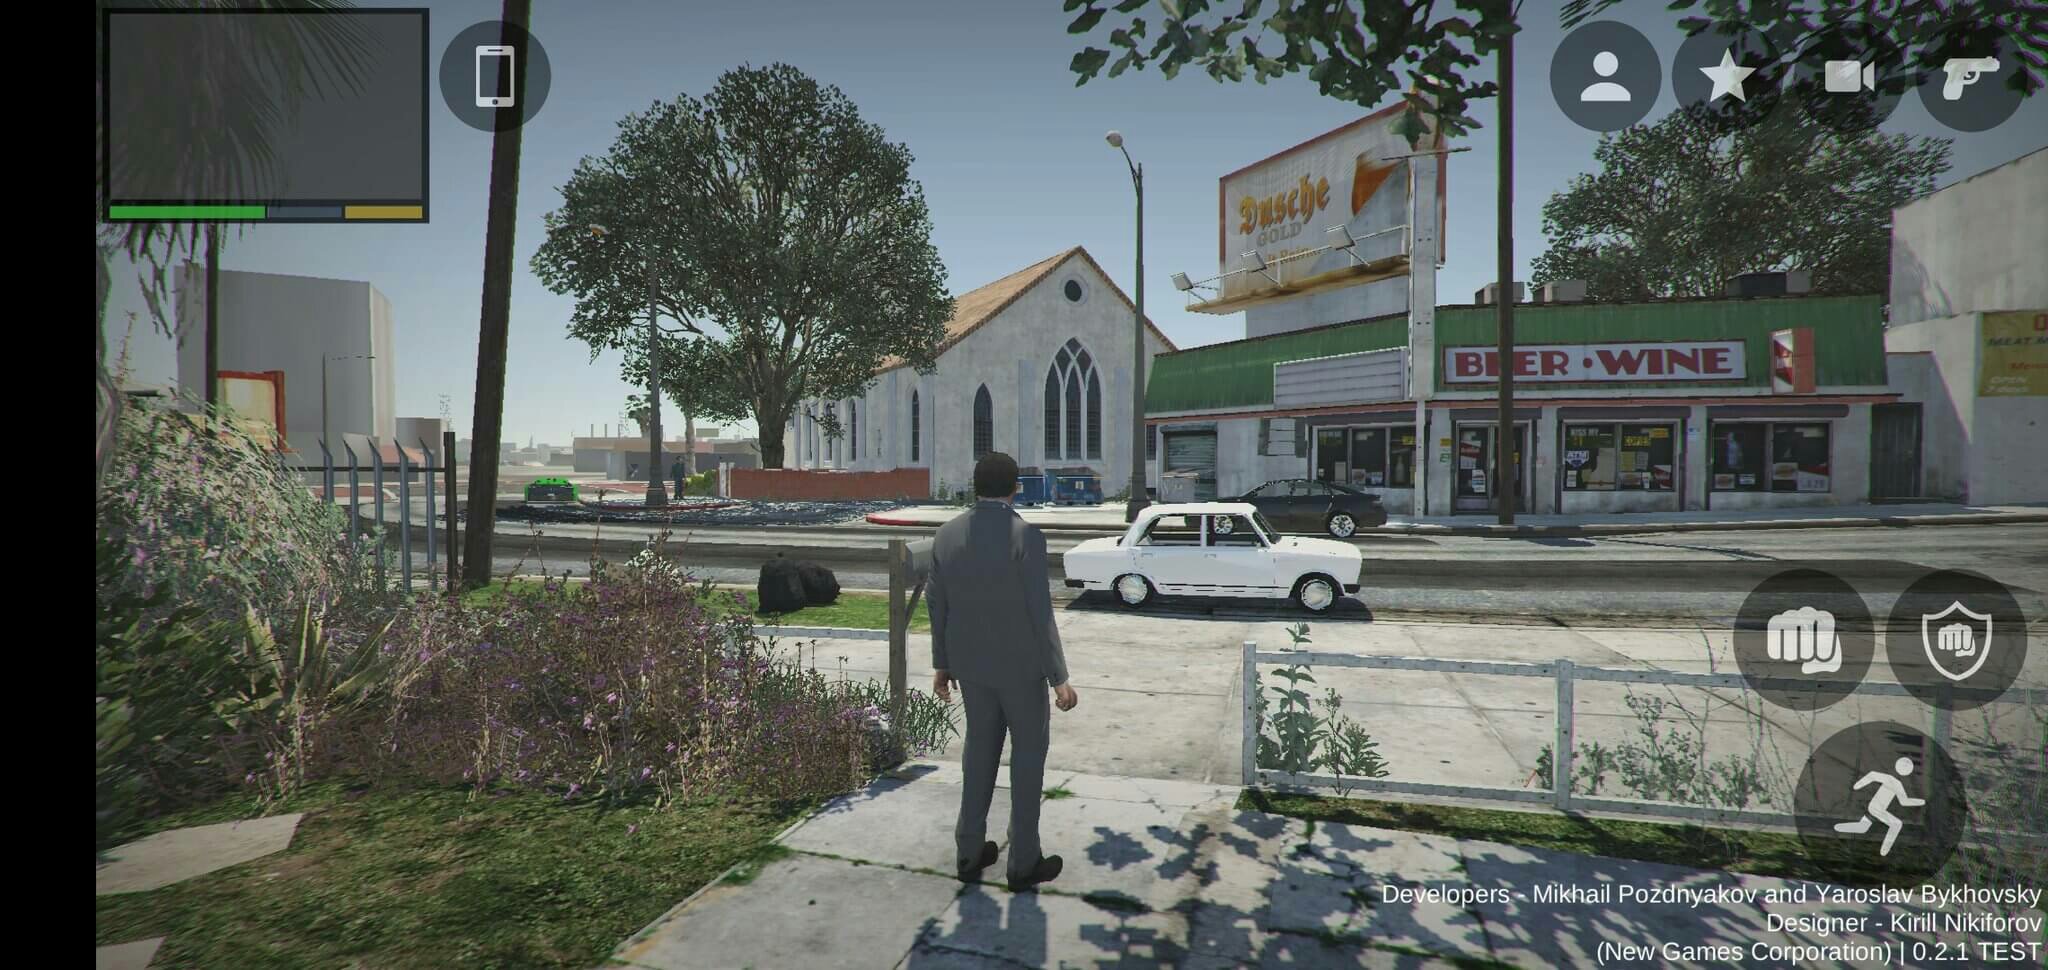 gta 5 mobile android